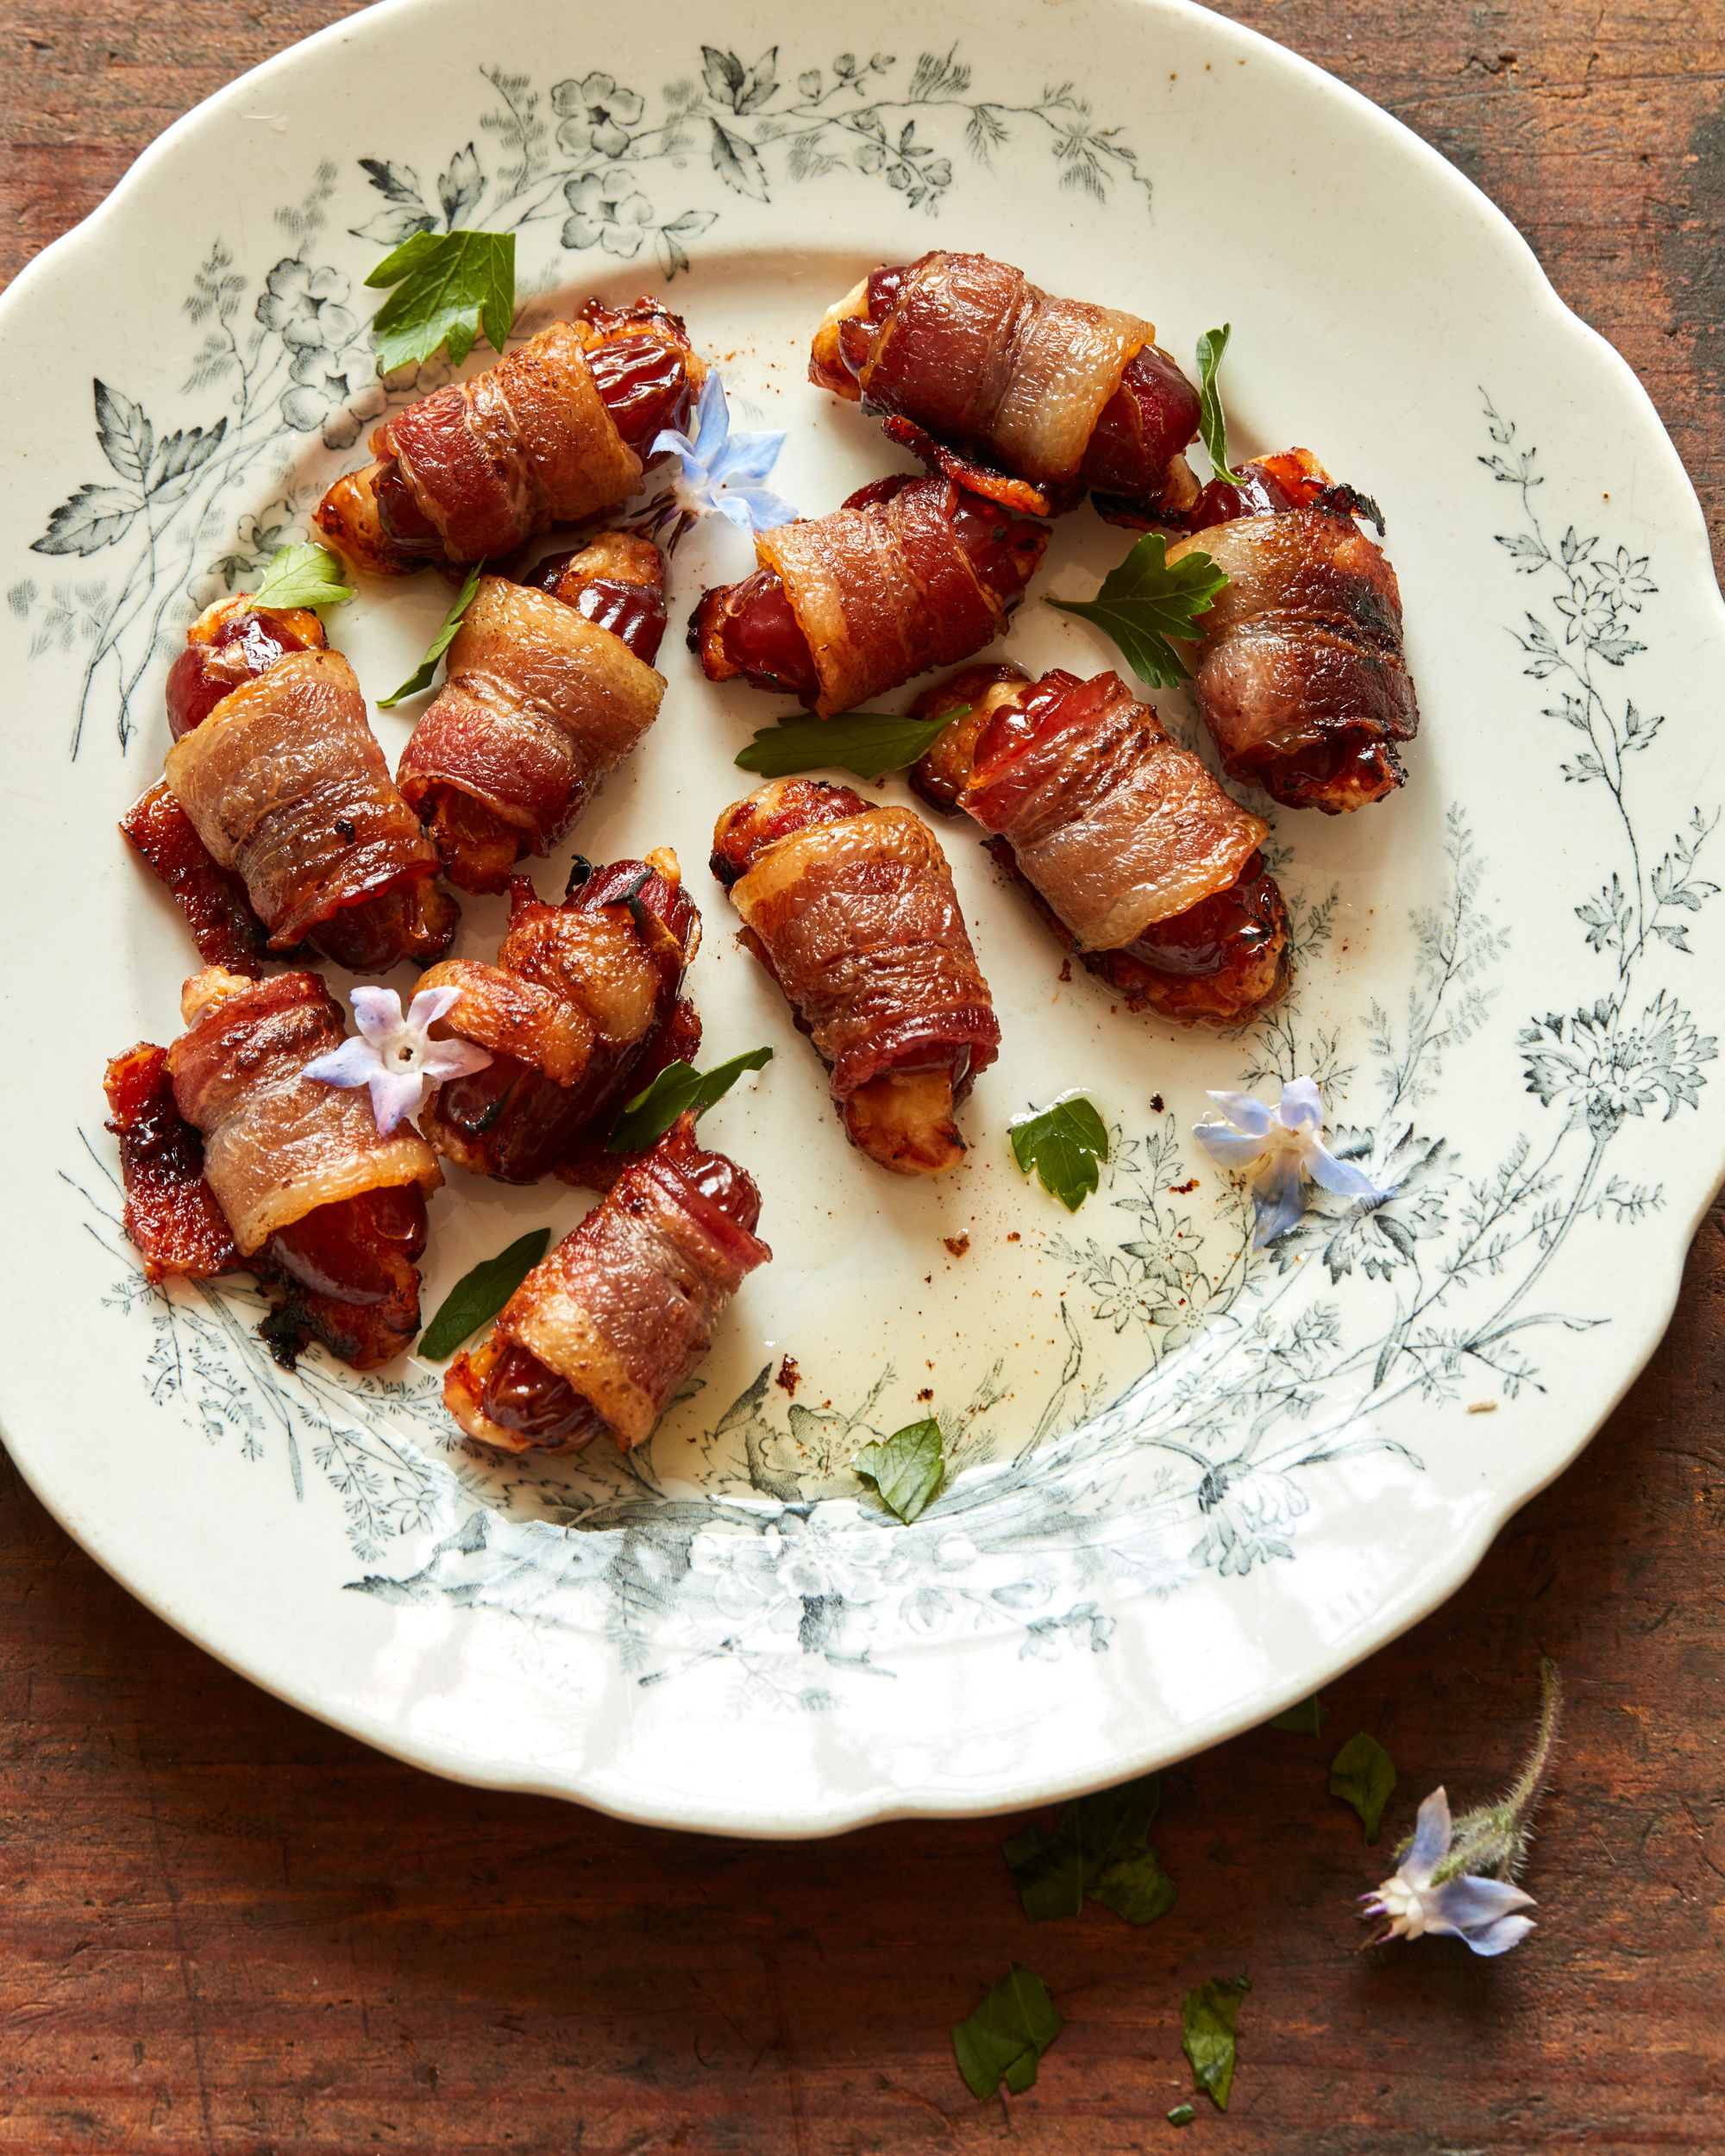 Dates and Bacon dish